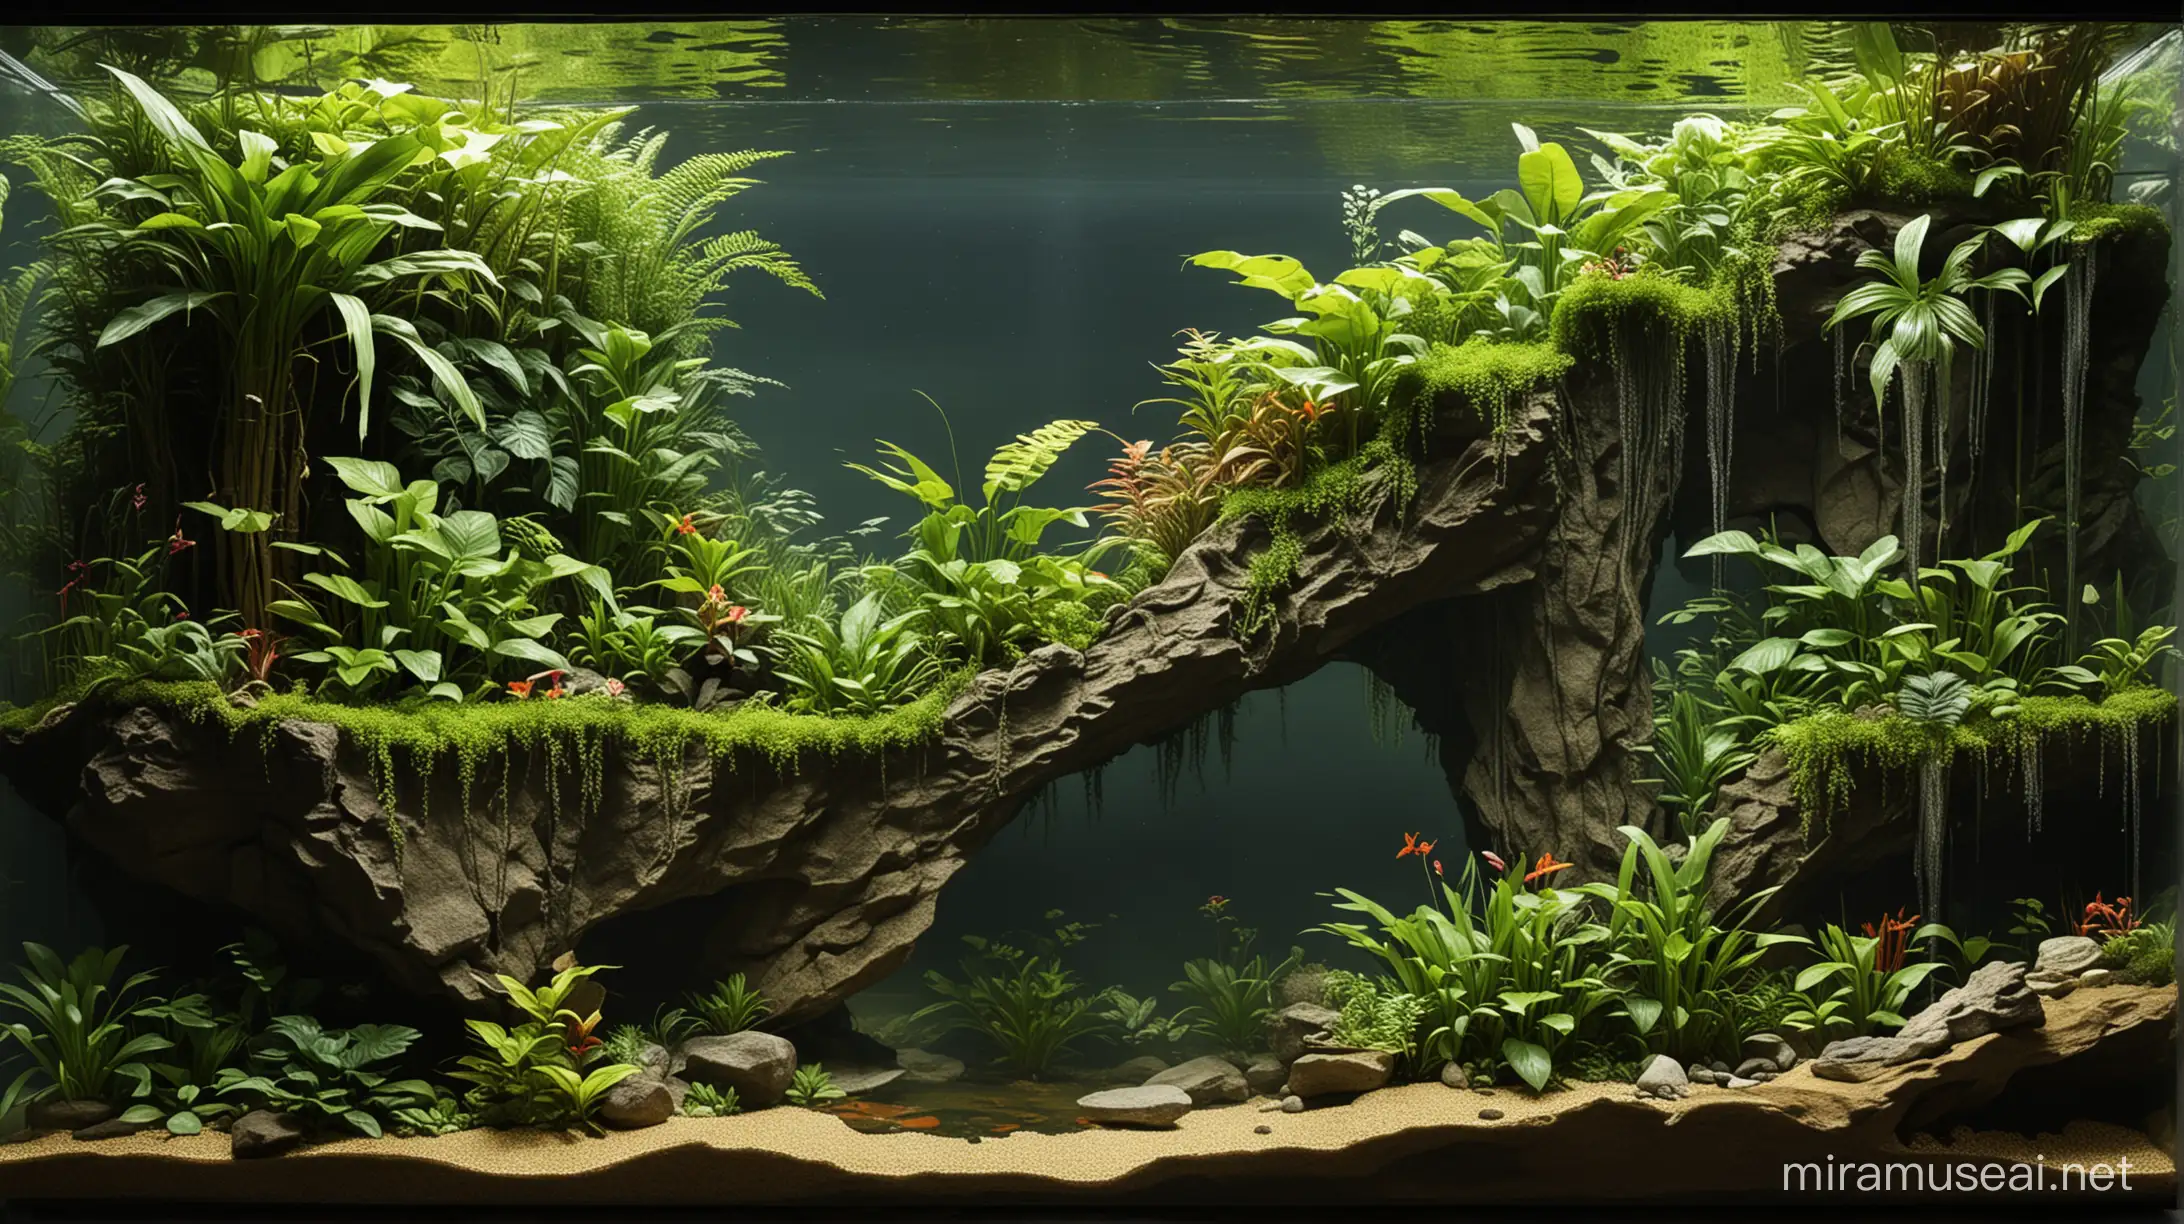 A lush tropical paludarium design of 130 cm long by 45 cm wide by 70 cm high, hosting a 175cm-long Elaphe Carinata with a high cliff cascading waterfall, featuring a 27 cm-deep lake-like area at the front. A large, concealed cave on the left offers a retreat, while the right boasts a warm, flat basking area for relaxation under a heat spot, balancing aquatic and terrestrial habitats with vibrant flora.